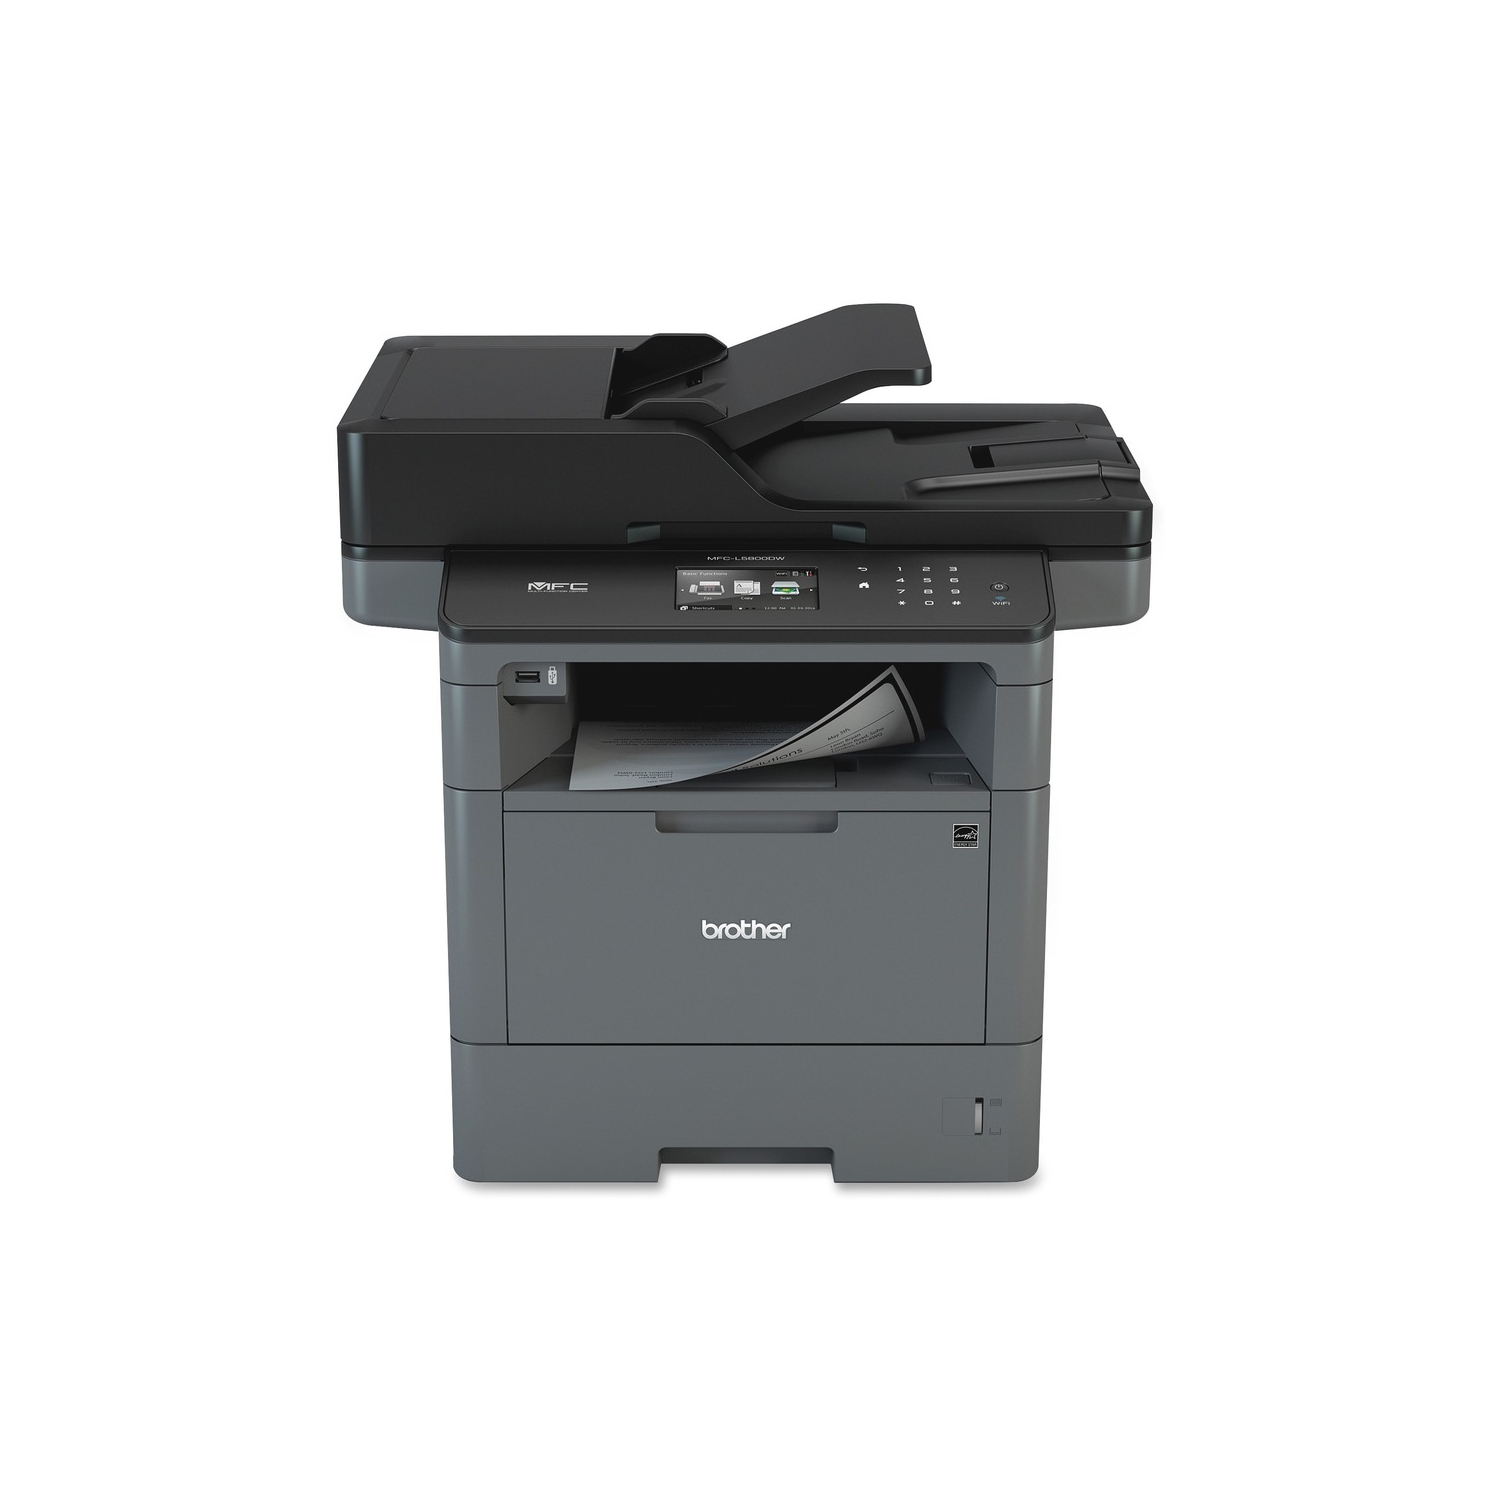 Brother MFC-L5800DW Laser All-in-one Printer MFCL5800DW